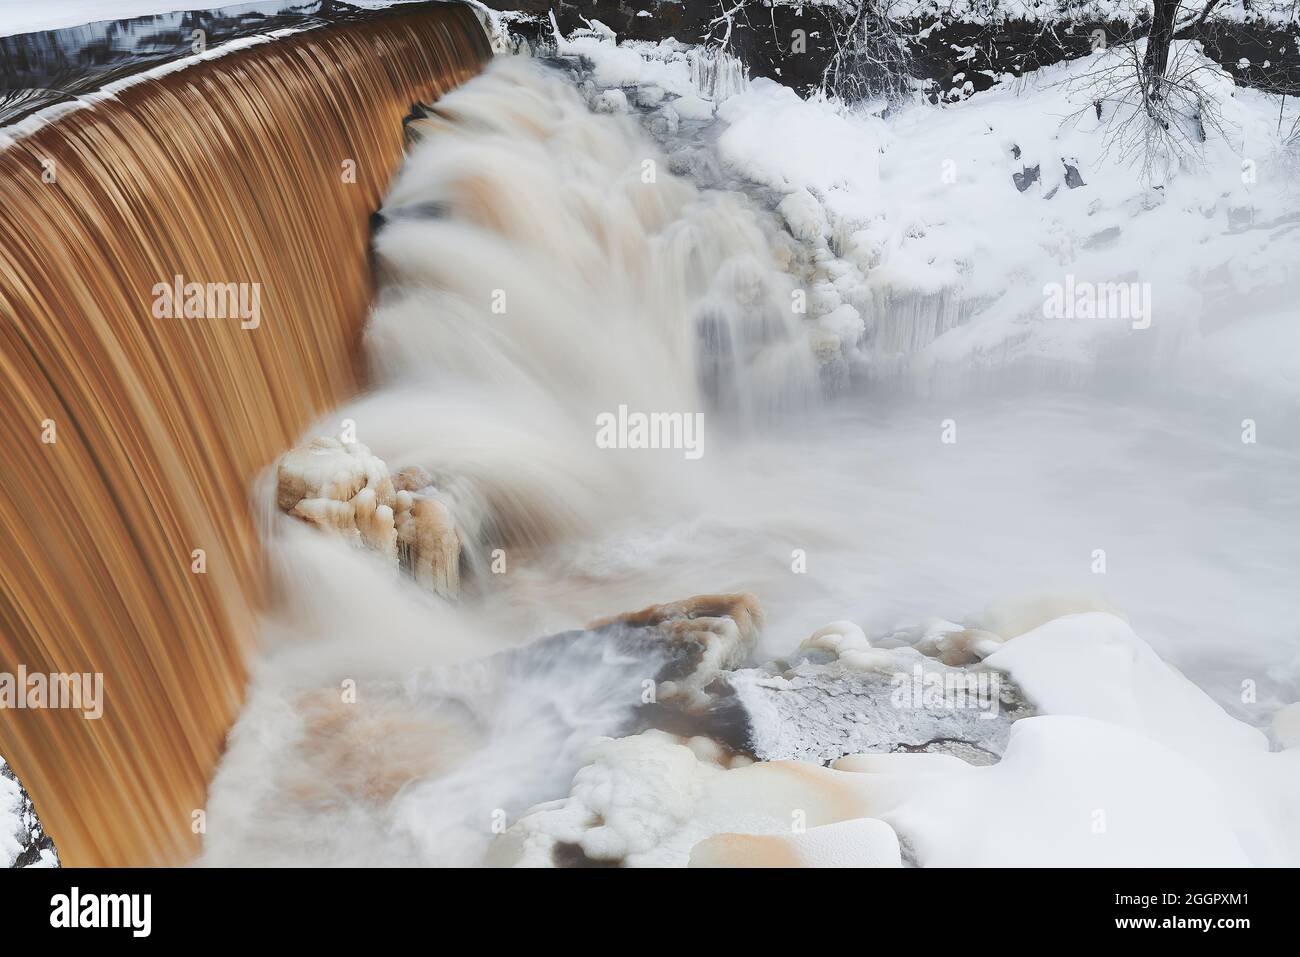 Water pours over the dam and icy rocks in the mouth of Vantaa River at the Vanhankaupunginkoski rapids (Vanhankaupunginkosken putous) extremely cold w Stock Photo